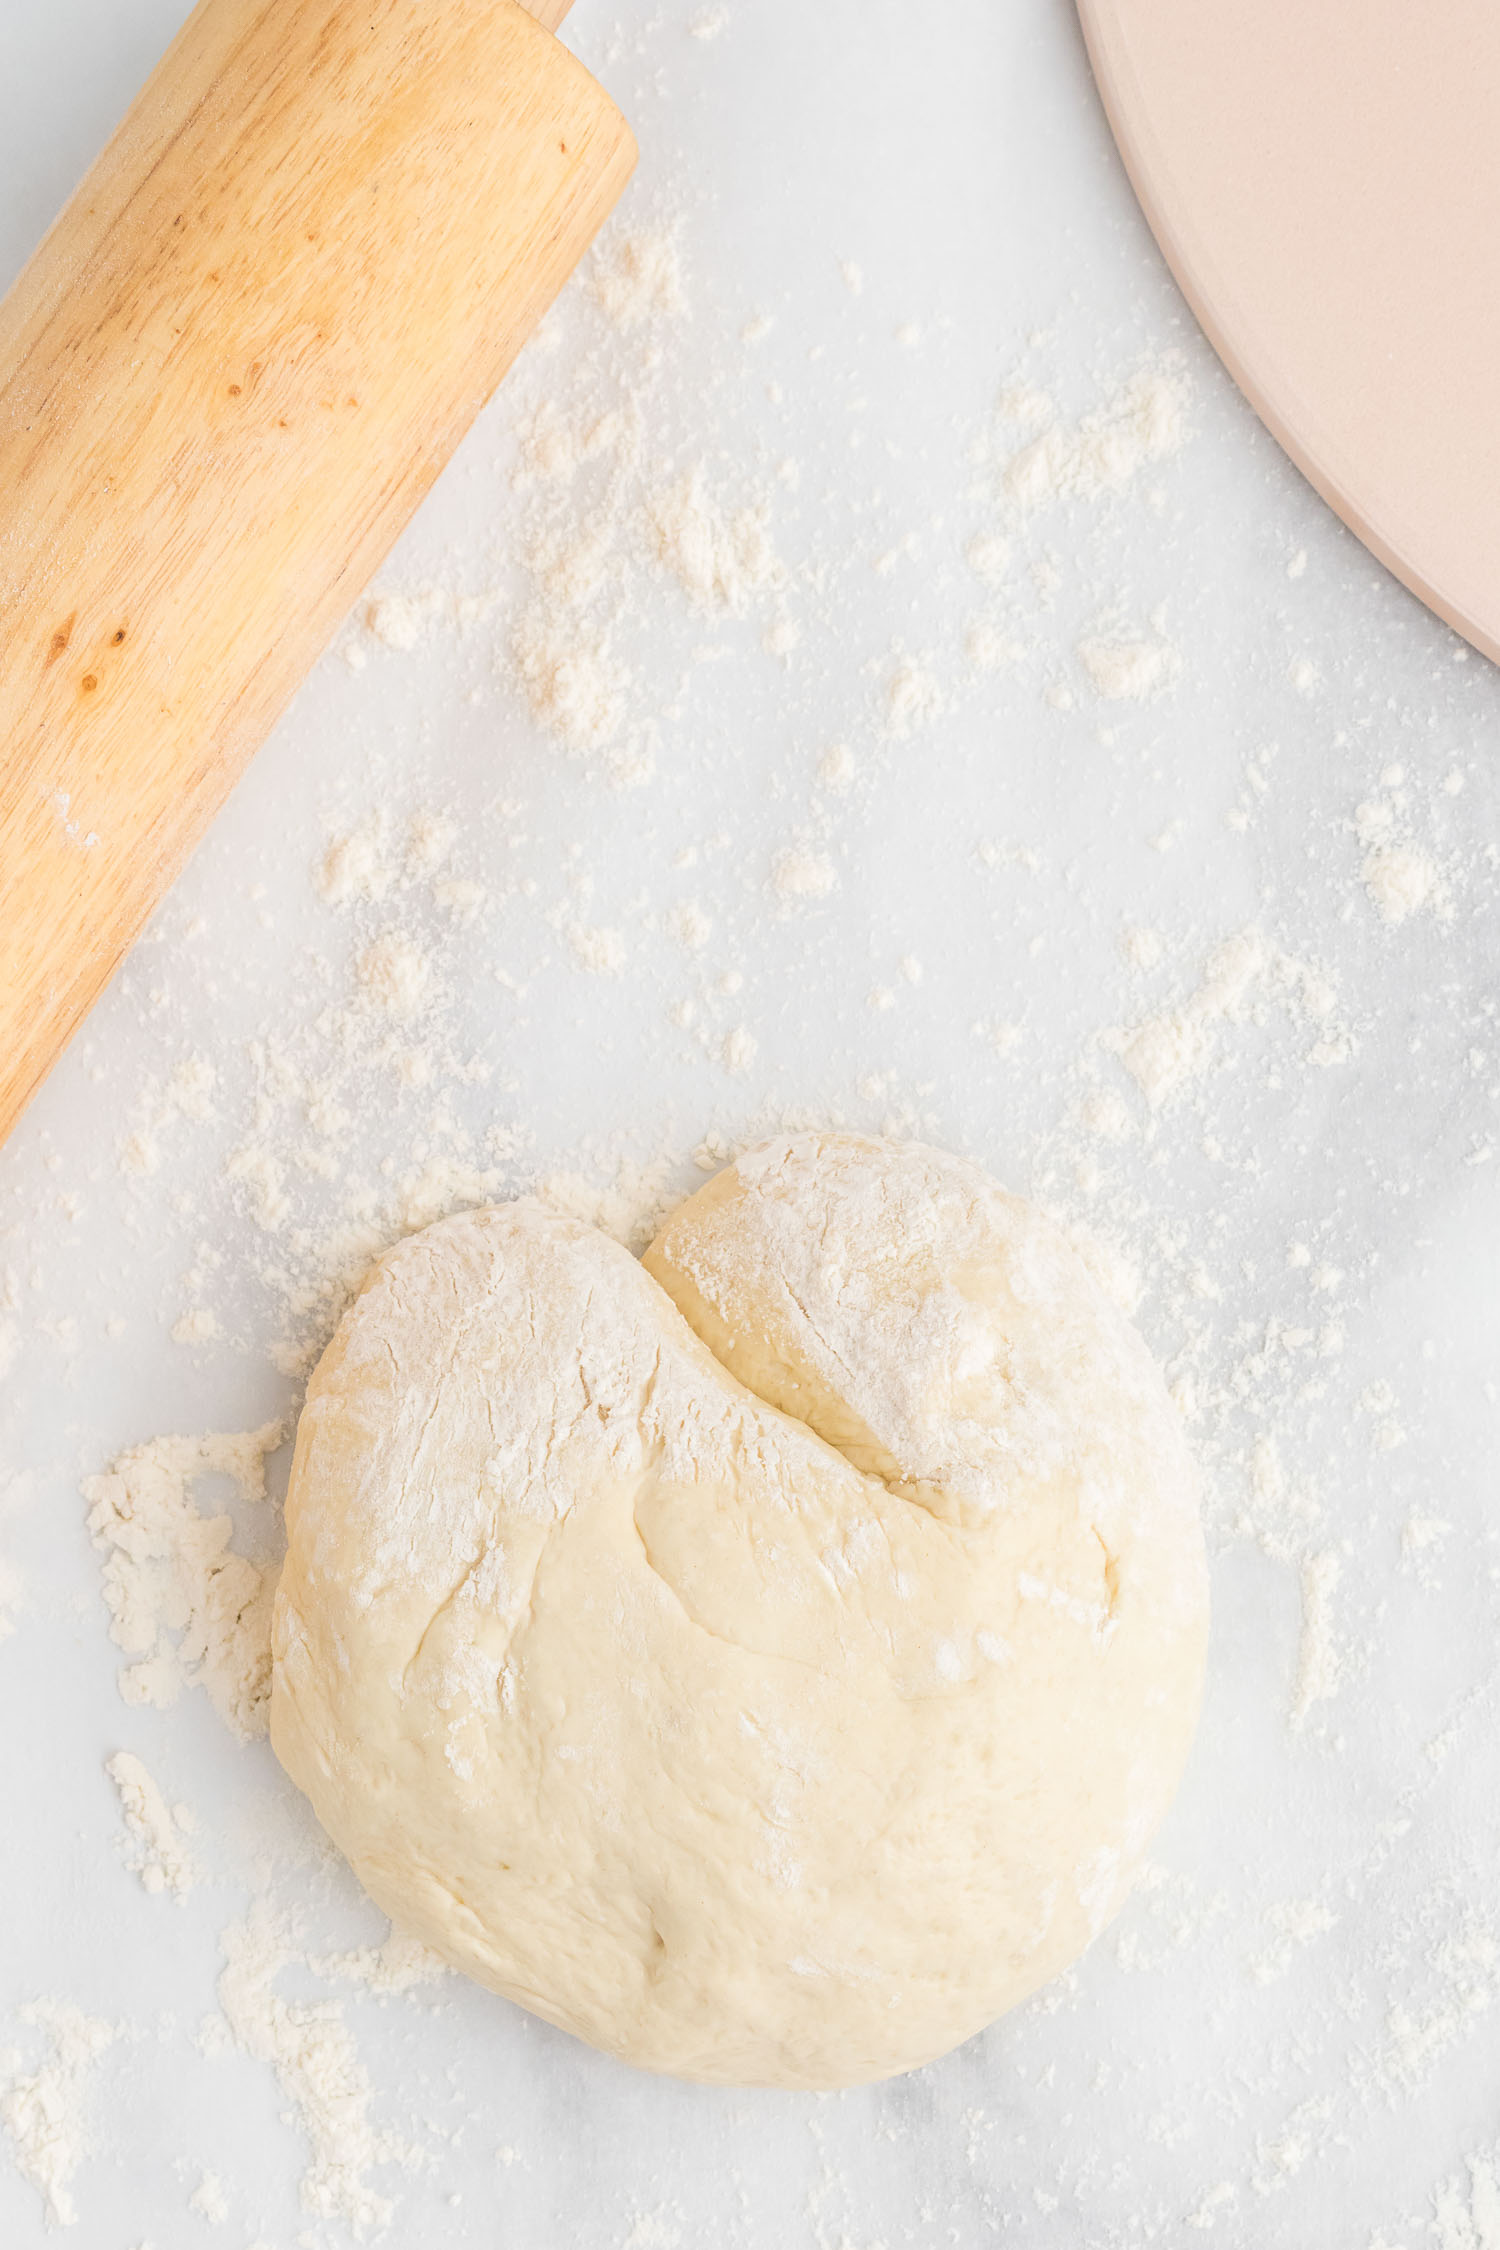 A ball of pizza dough with flour  and a rolling pin and pizza stone next to it.